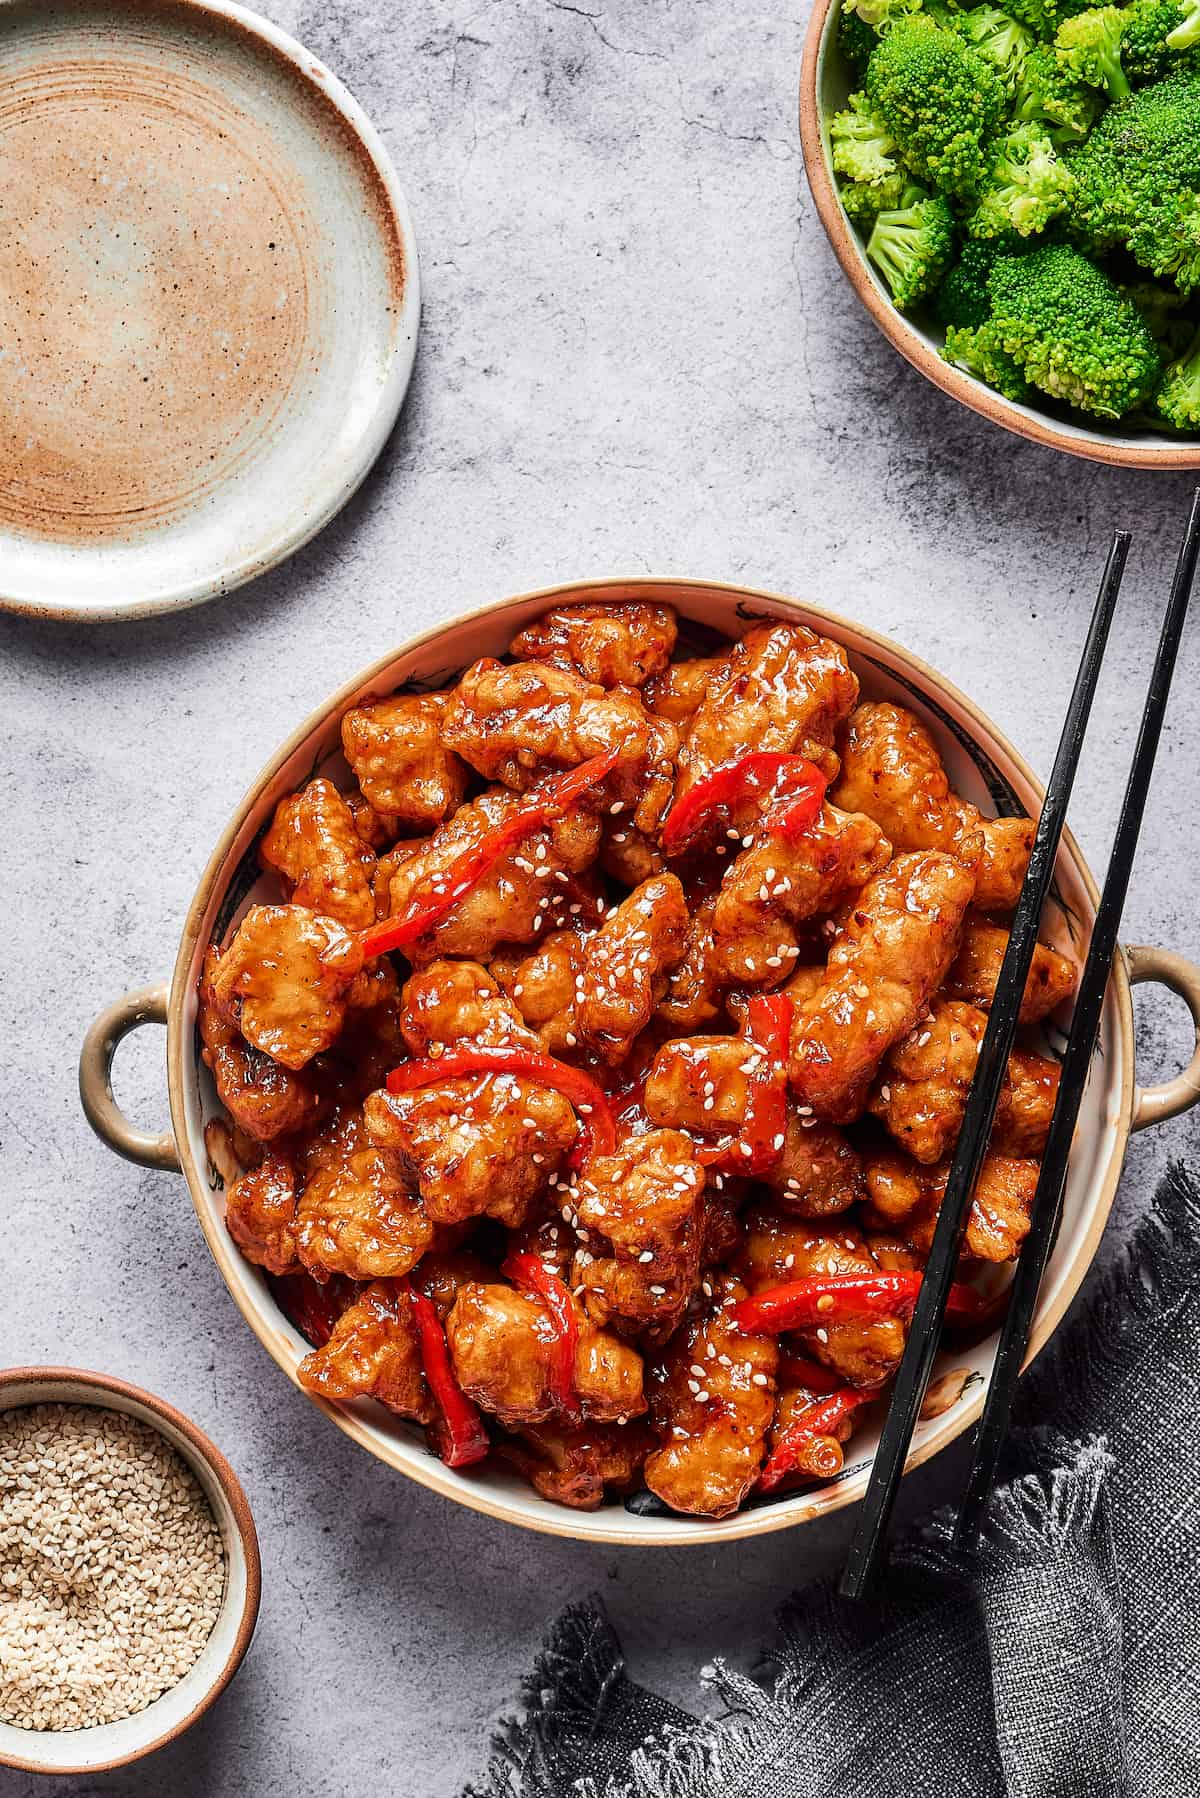 A large bowl of fried chicken bites tossed with a sticky sauce. A pair of chopsticks is resting on the bowl.